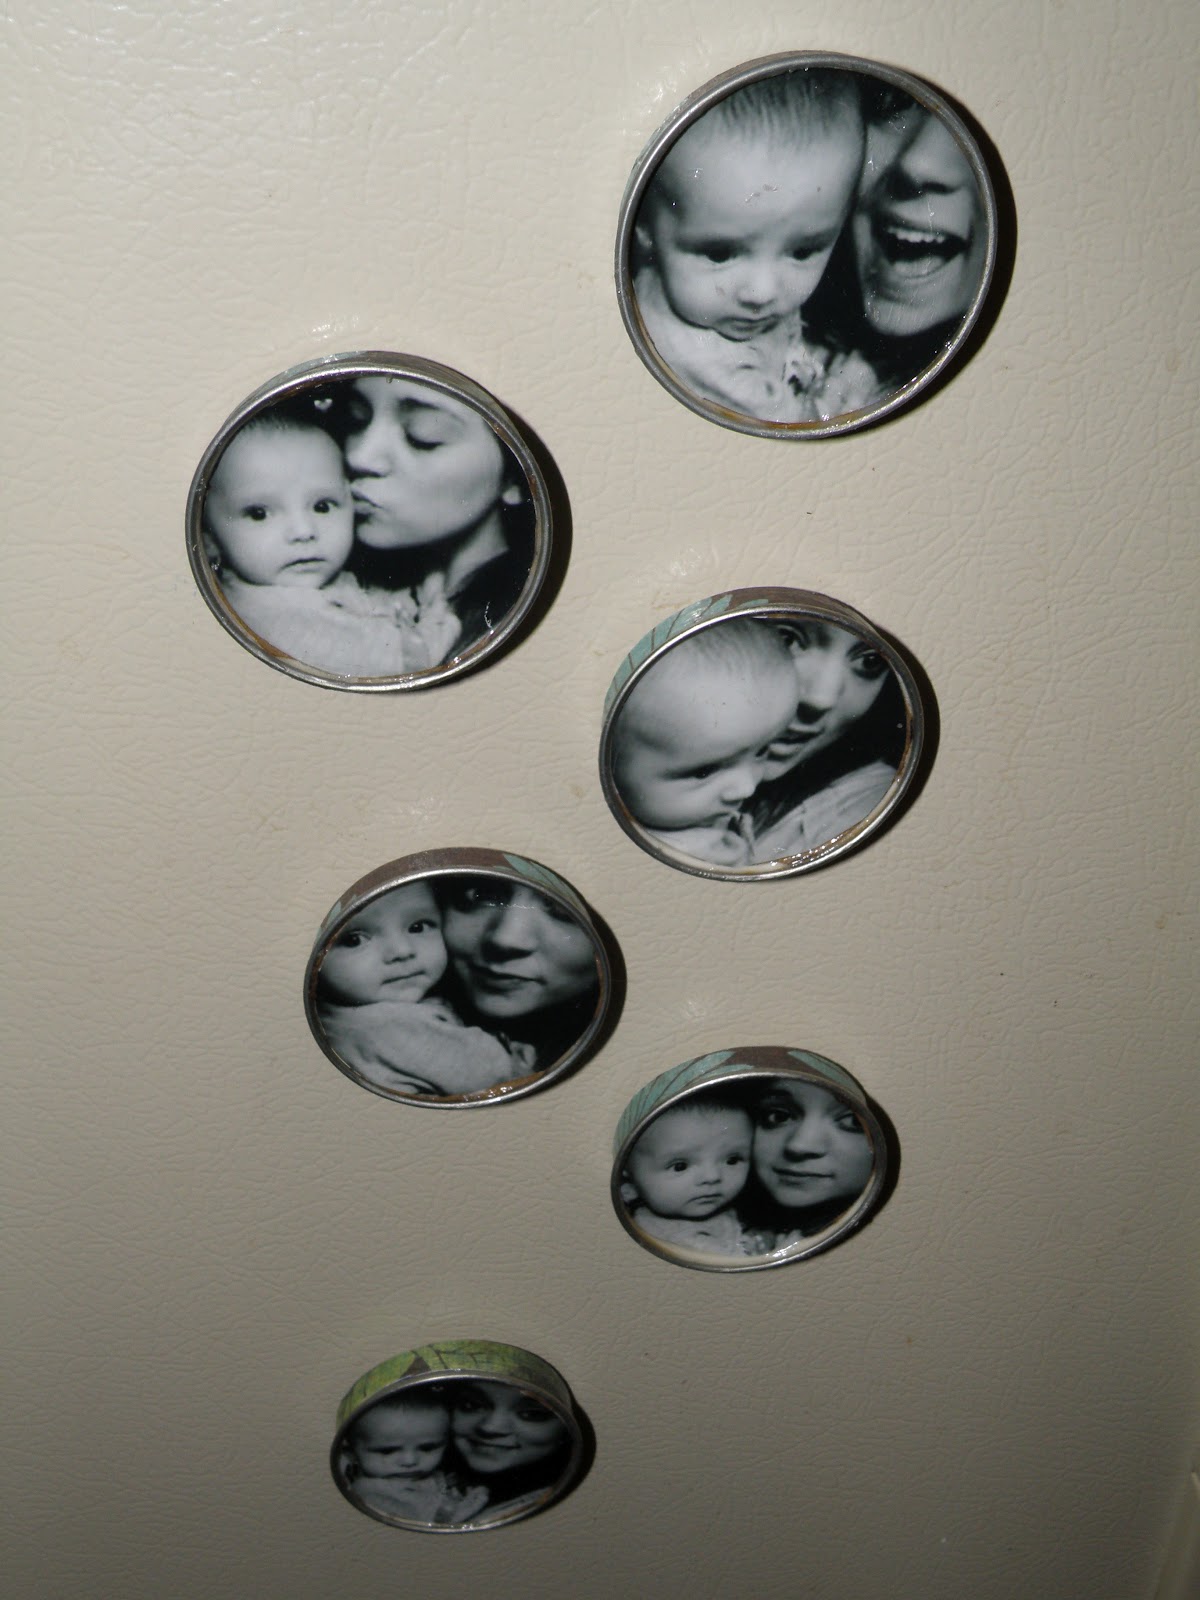 Cheap photo storage in a tiny apartment is easy with a DIY mason jar picture magnet.